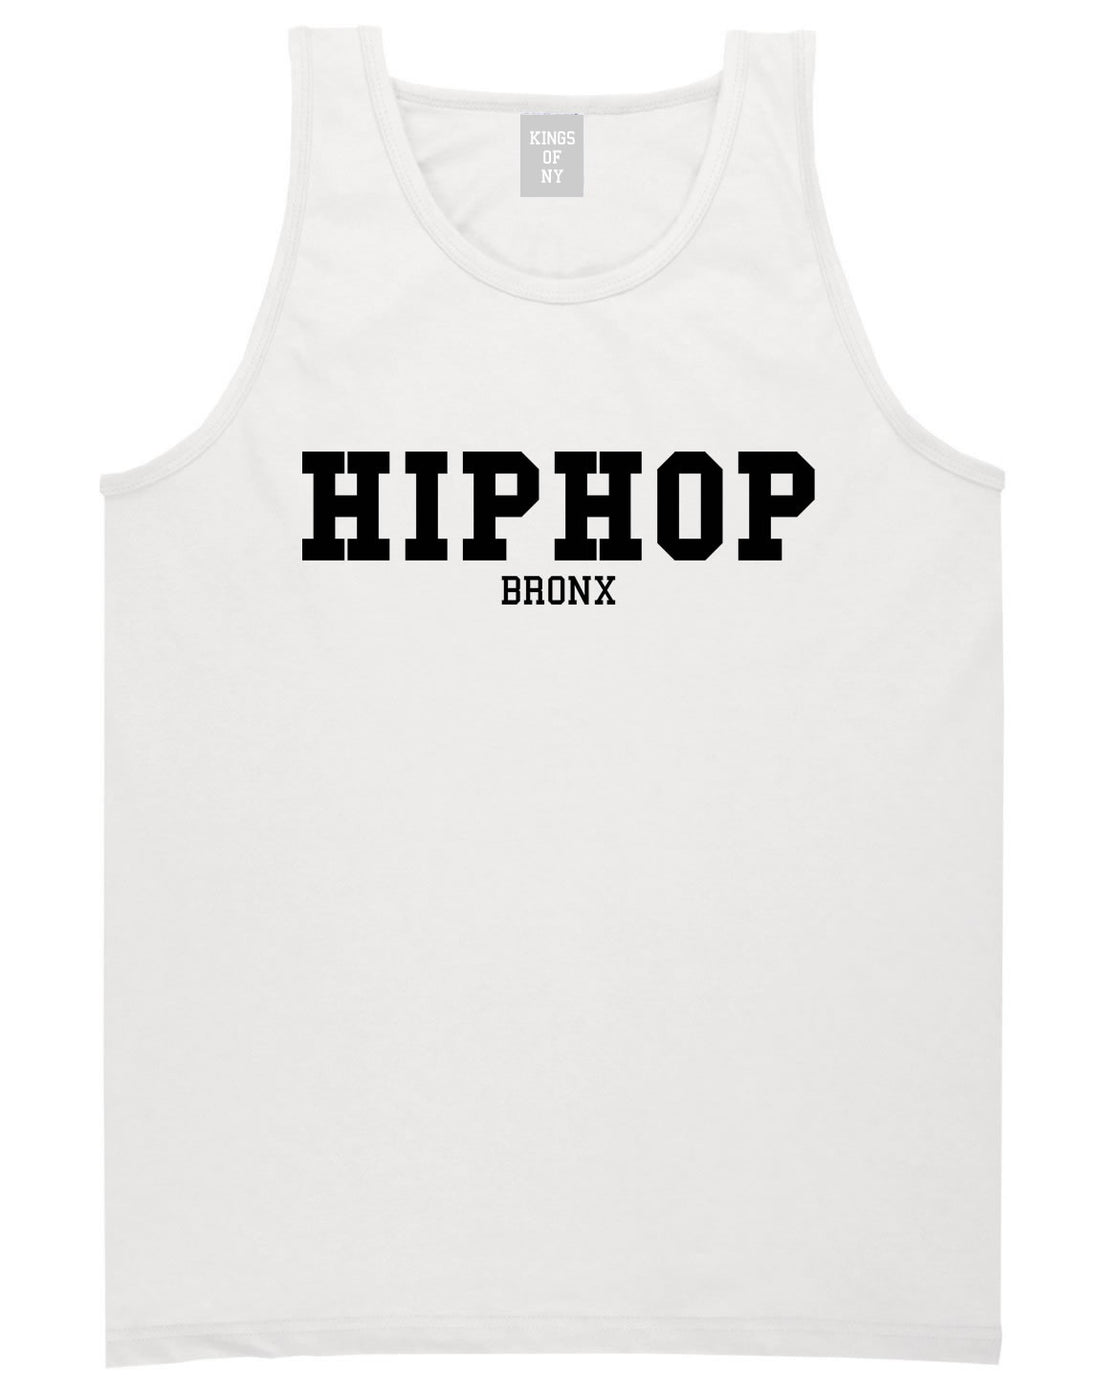 Hiphop the Bronx Tank Top in White by Kings Of NY